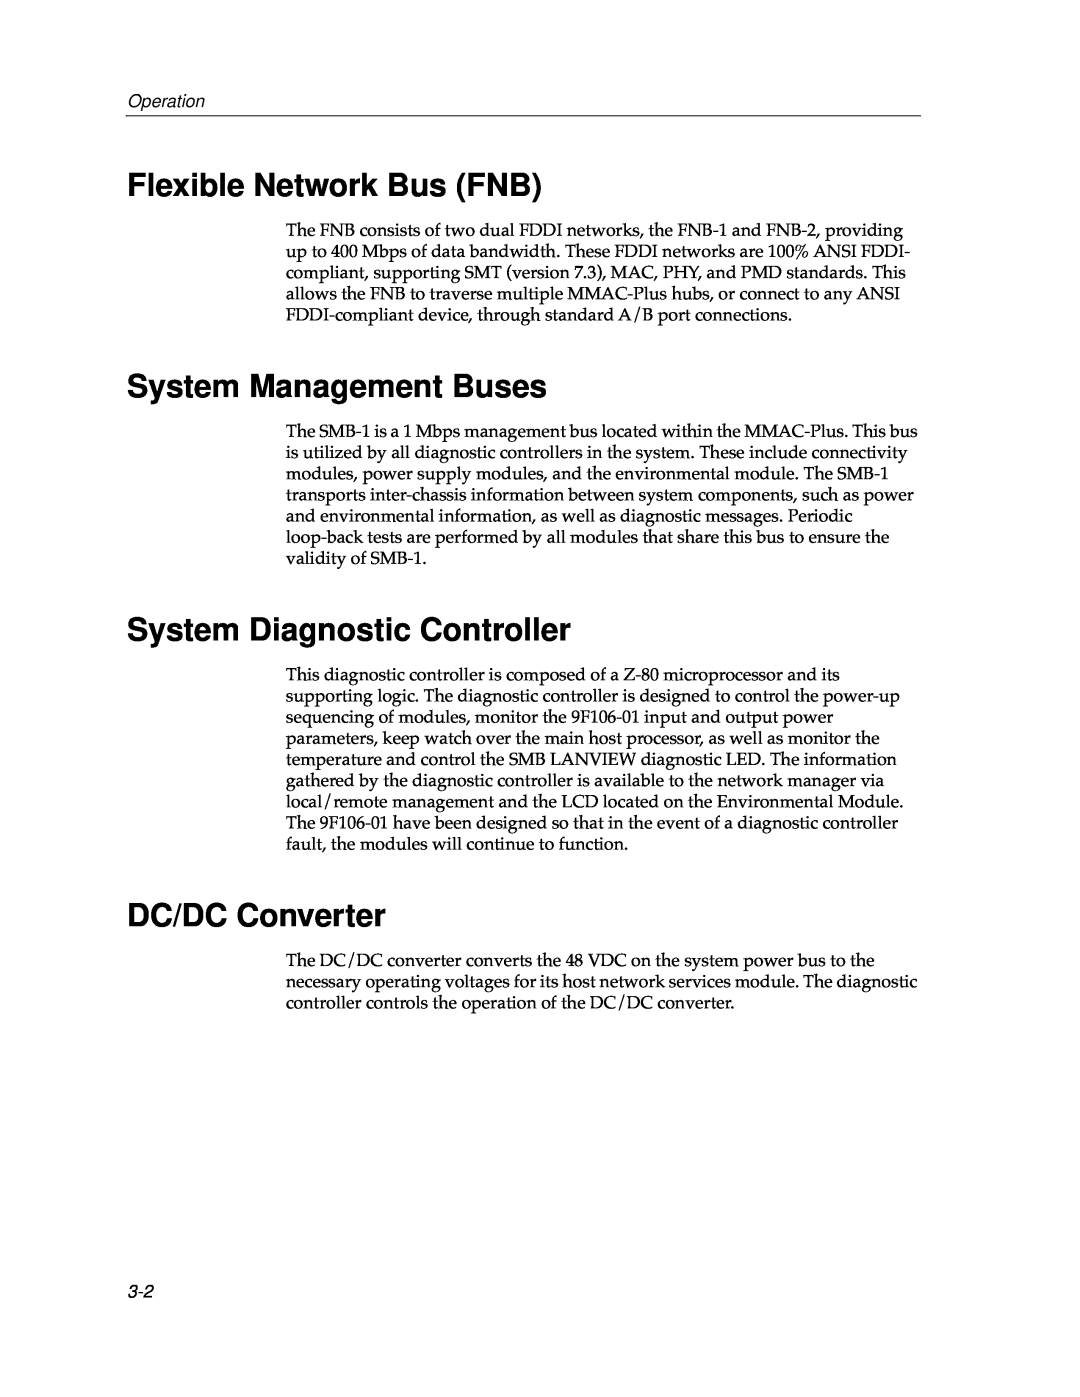 Cabletron Systems 9F106-01 Flexible Network Bus FNB, System Management Buses, System Diagnostic Controller, Operation 